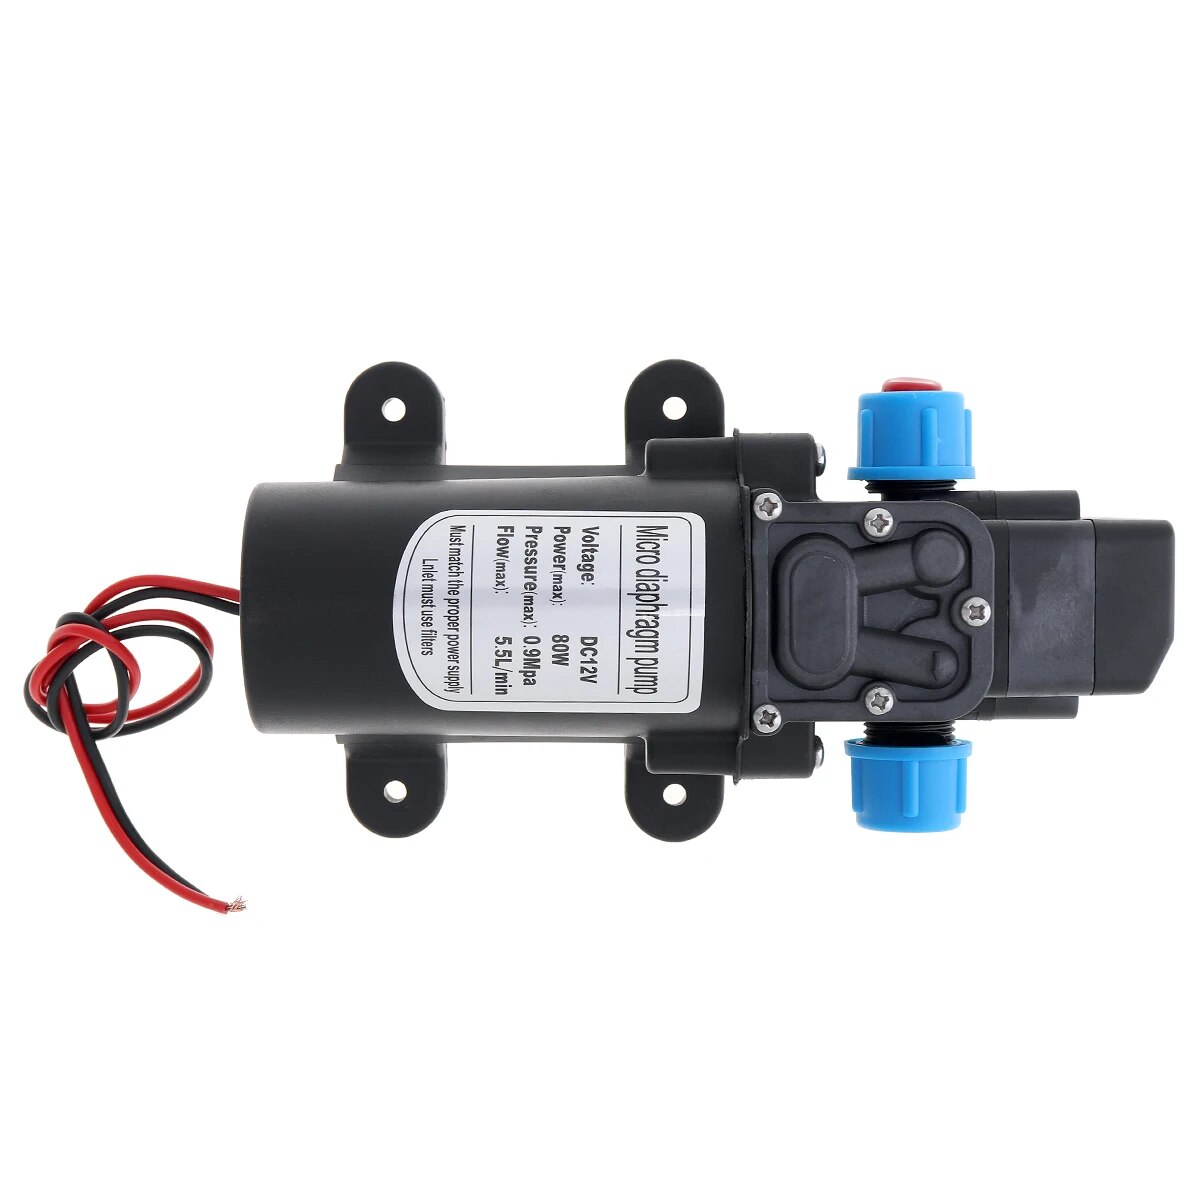 12V 80W 5.5L/min Self-suction DC Mini Diaphragm High Pressure Electric Cars Wash Pump with Blue Nut for Cars / Home / Garden